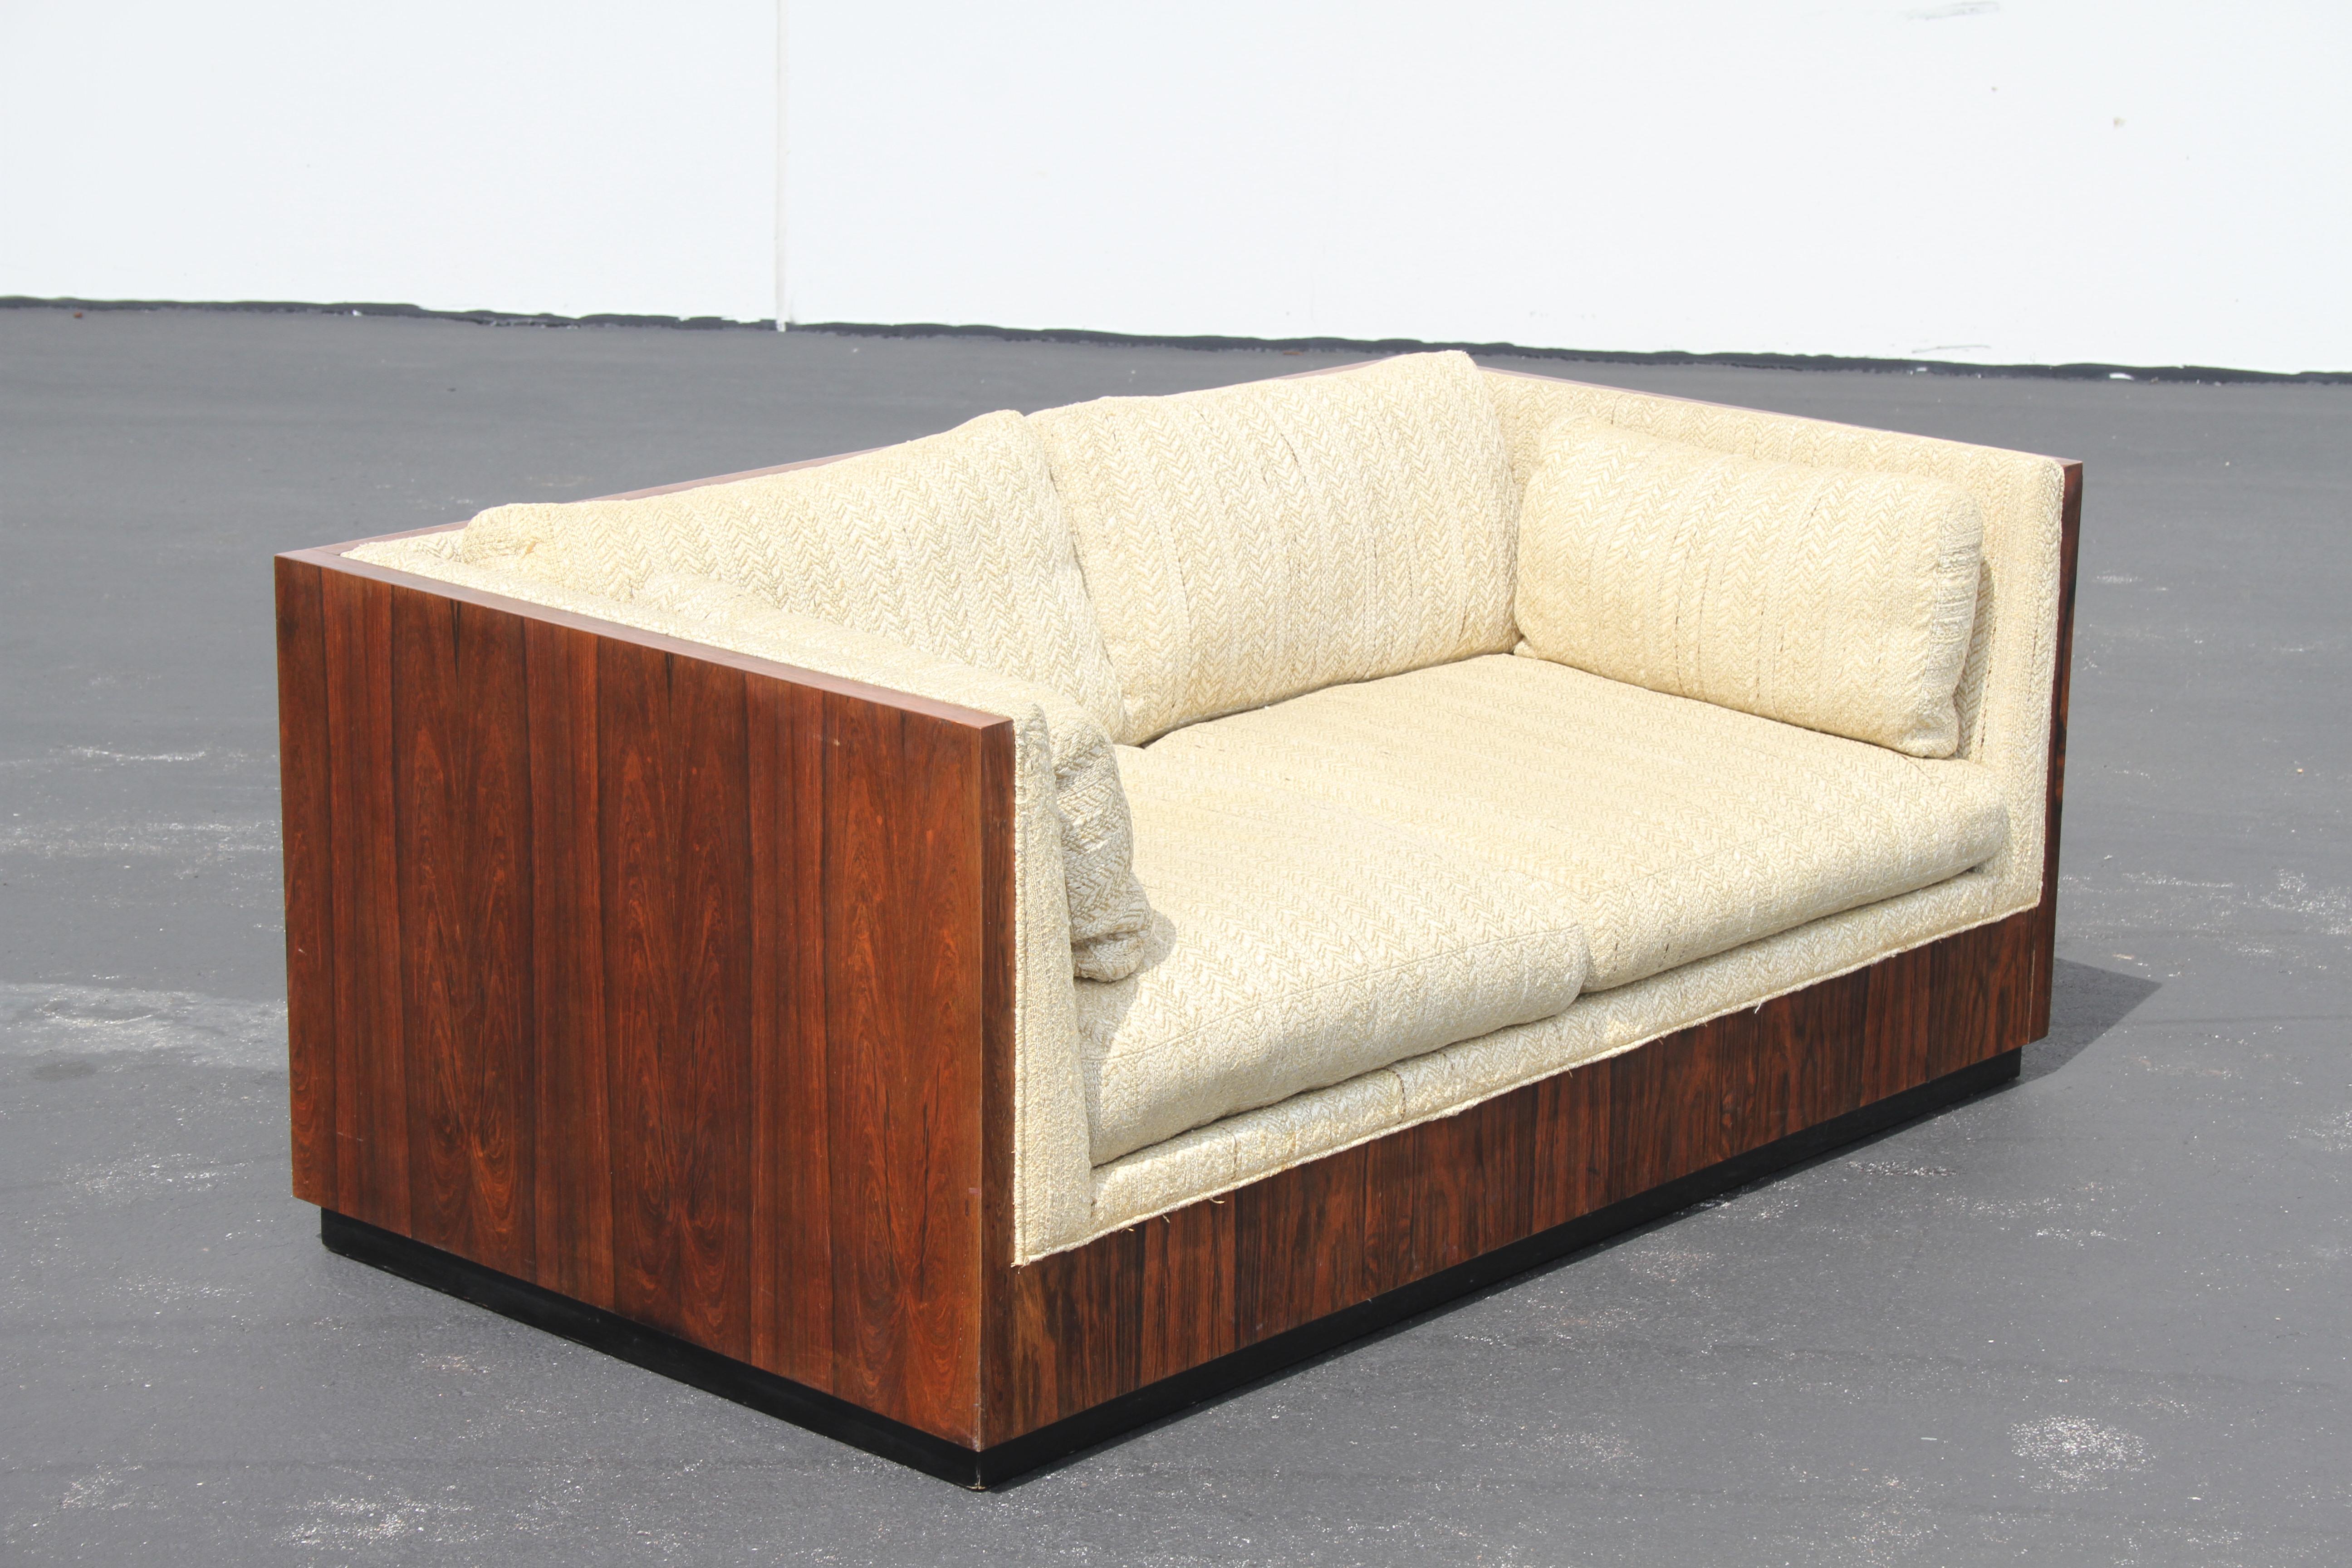 Pair of Milo Baughman for Thayer-Coggin Rosewood Settees, Loveseats or Sofas 1